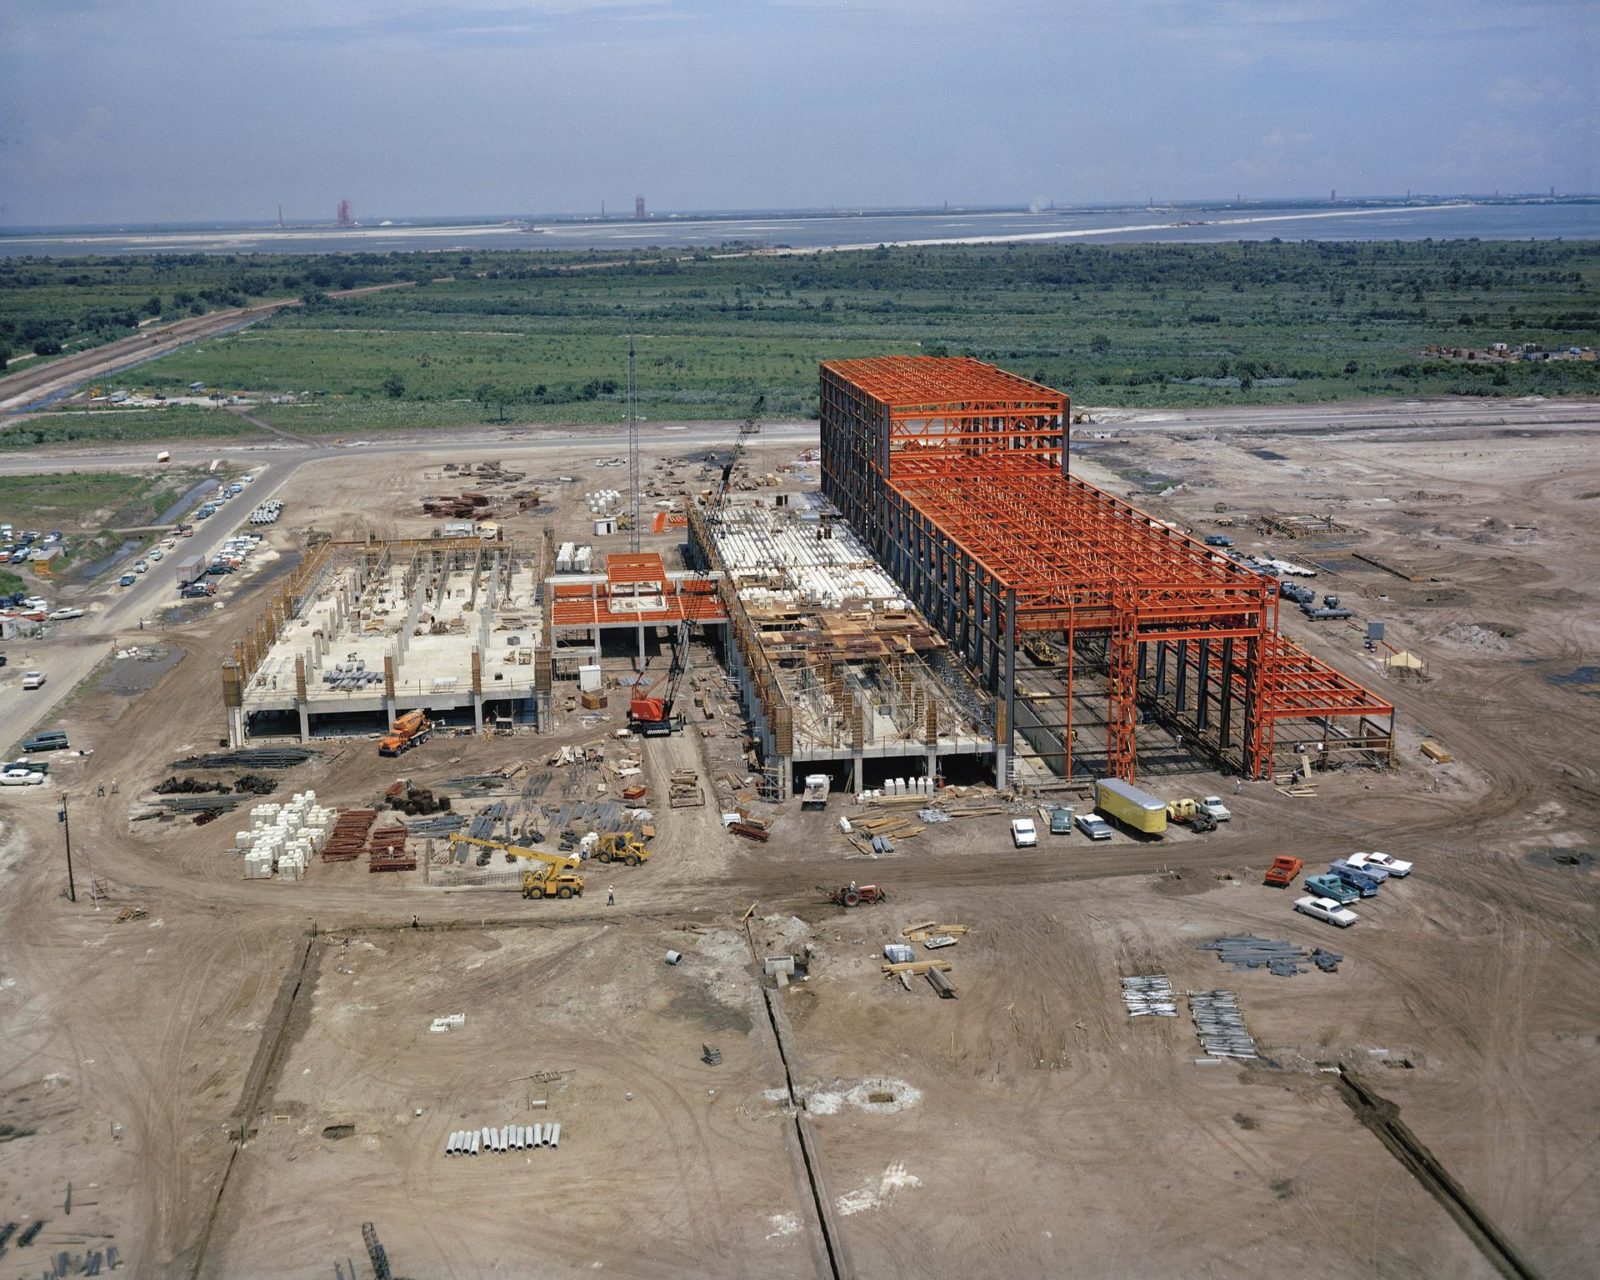 CAPE CANAVERAL Fla. This aerial view shows construction progress of